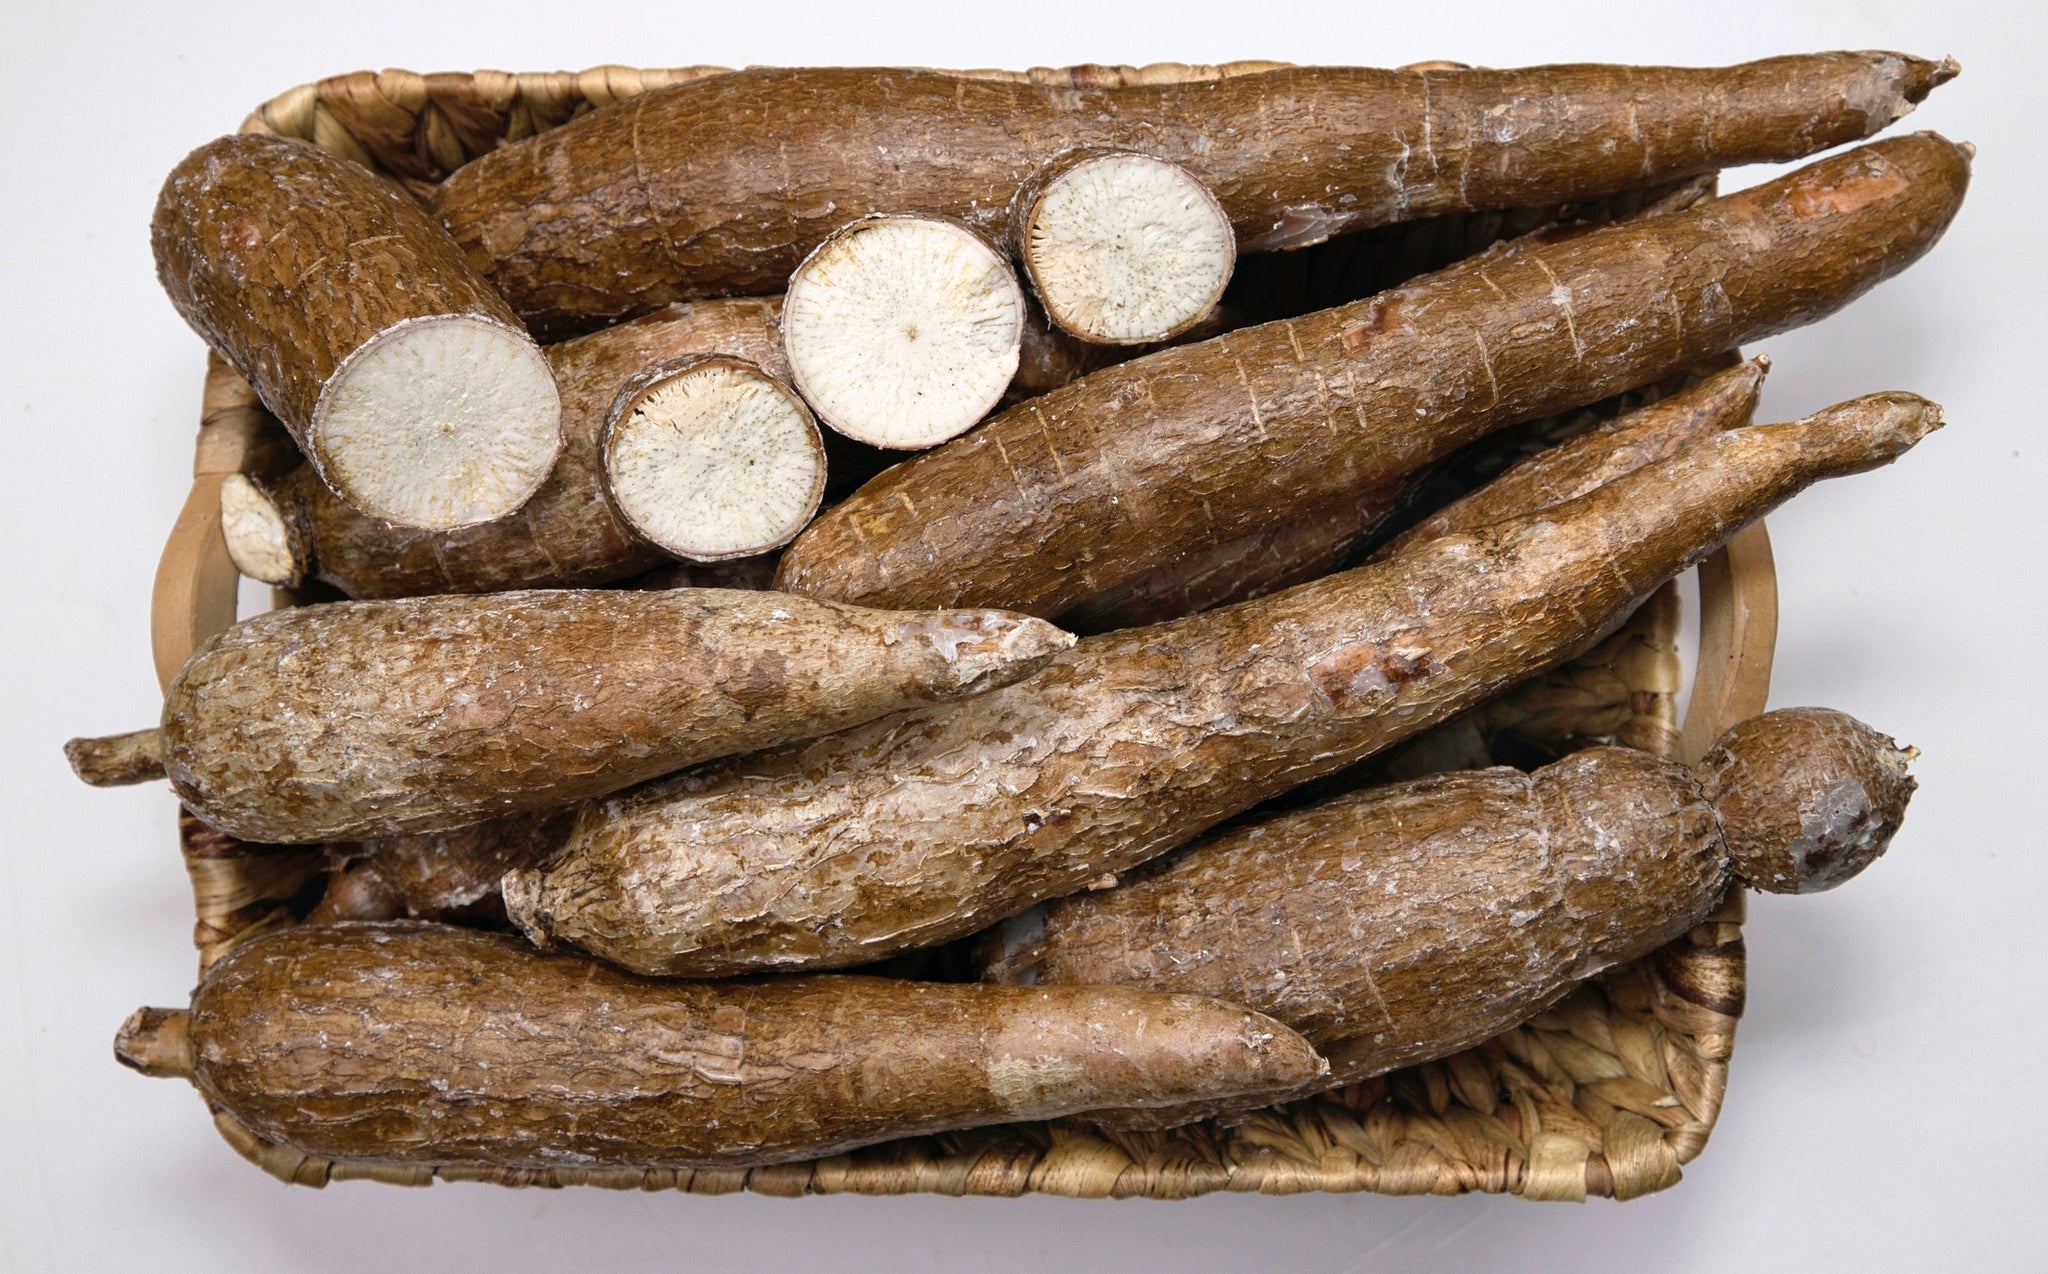 Cassava Root Benefits: Nutritional Facts and More!